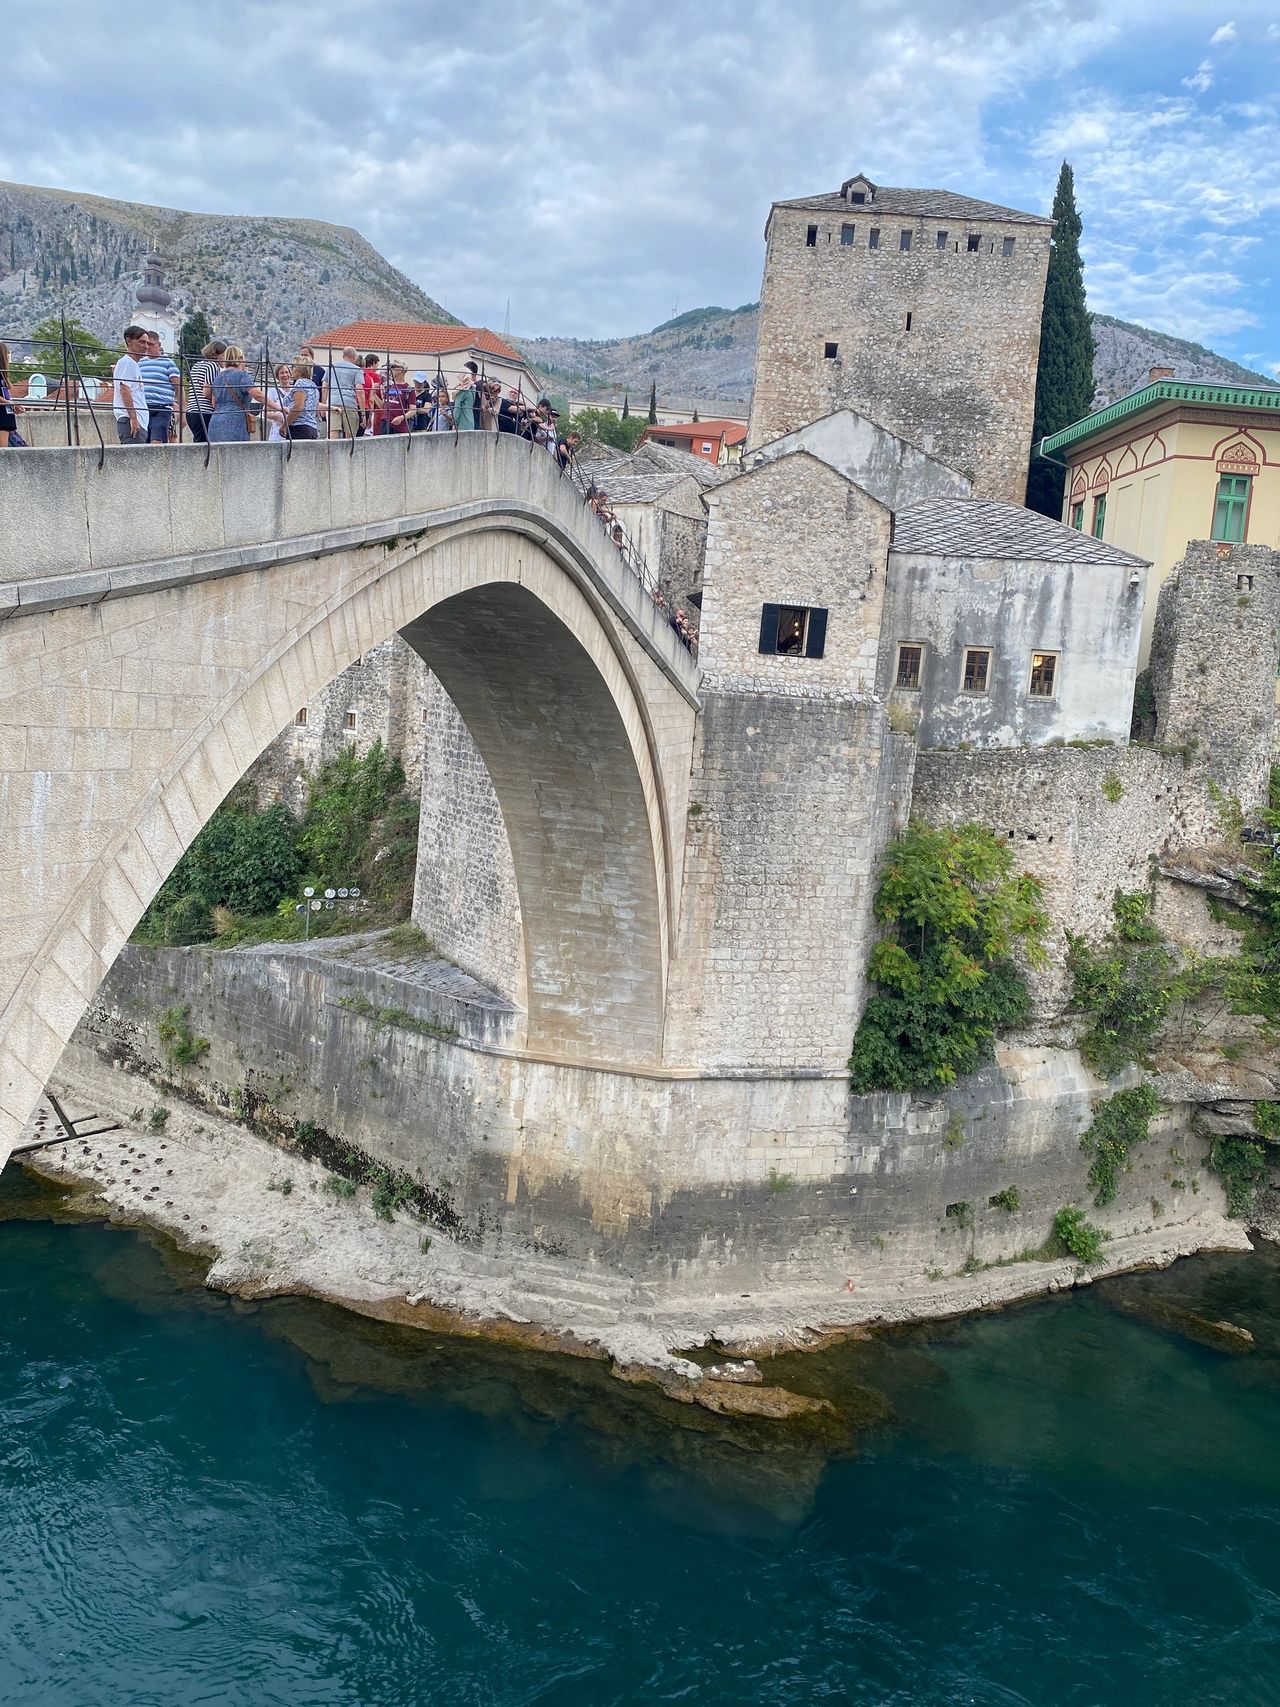 Bridge to the Old City in Mostar, Bosnia